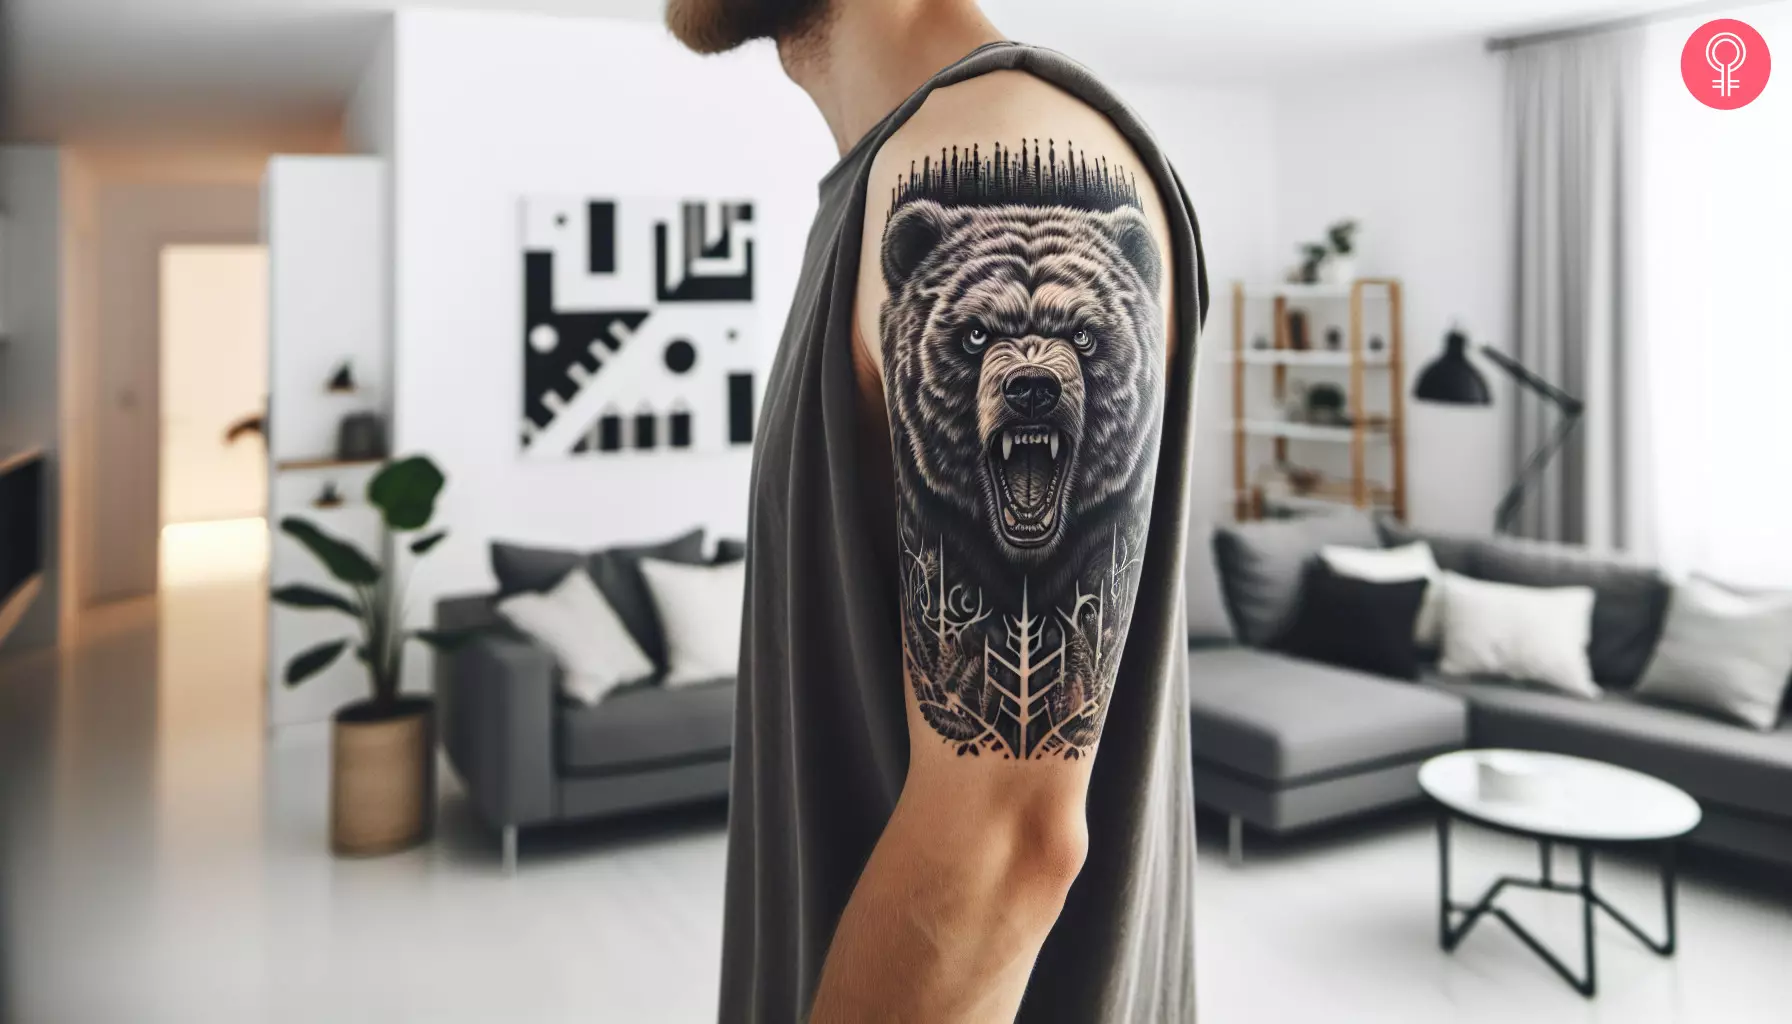 A black and gray bear tattoo on the upper arm